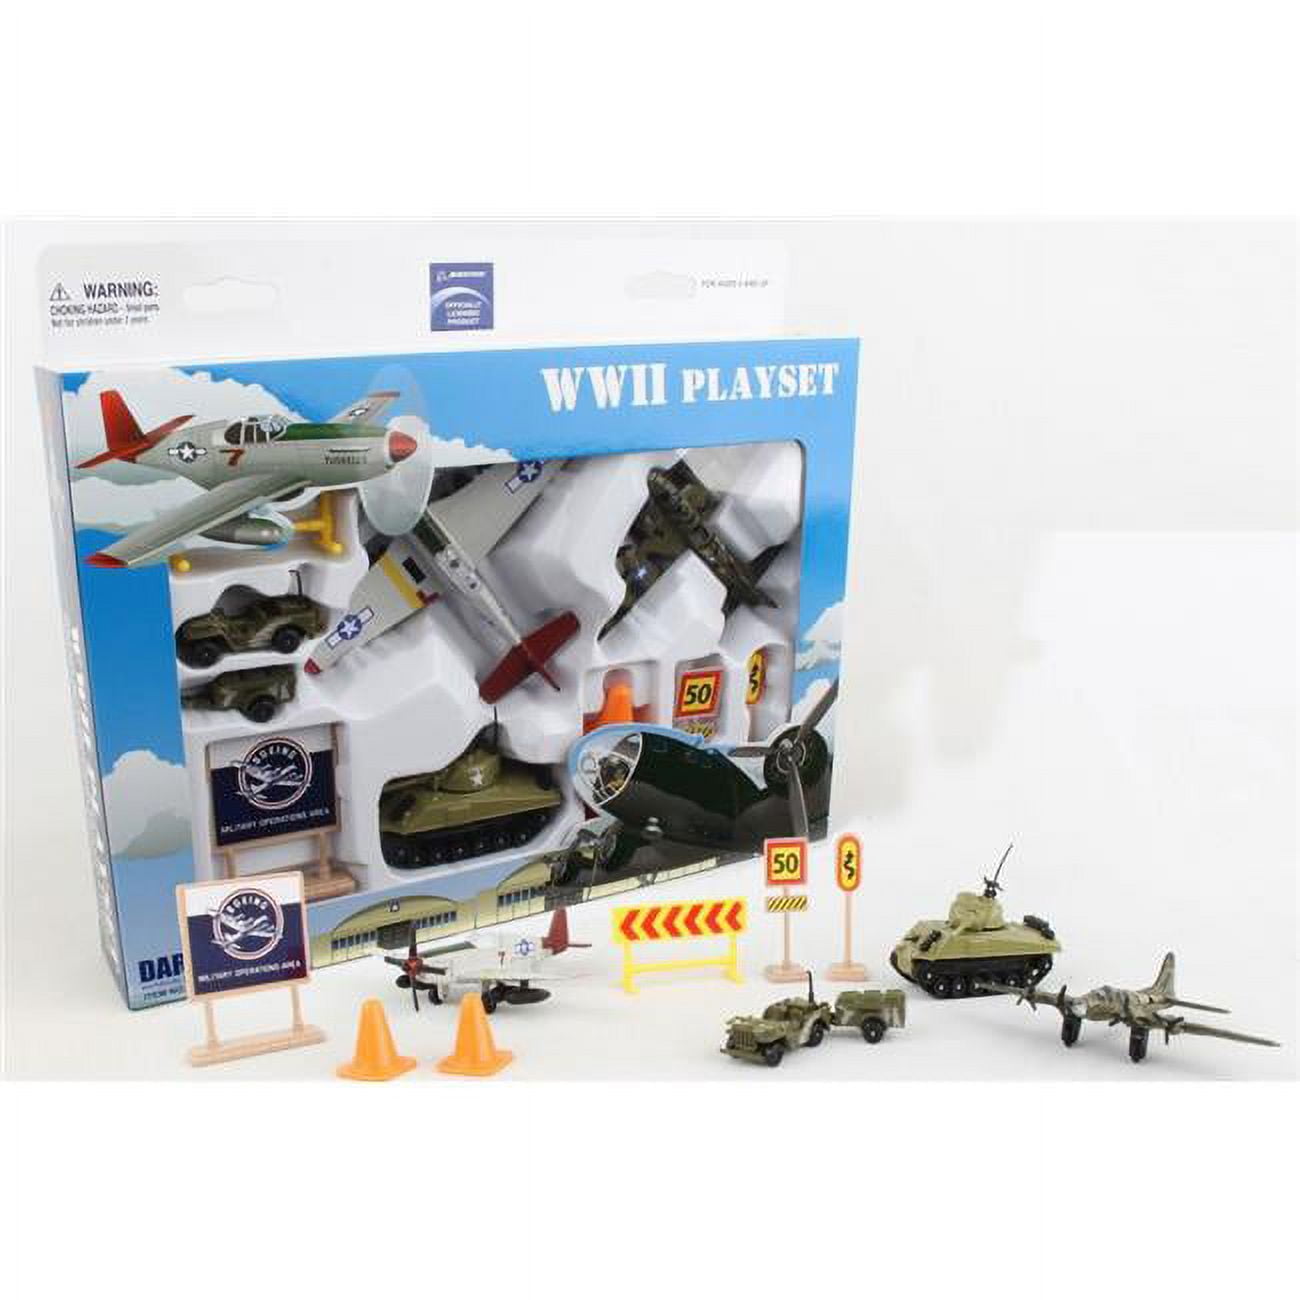 Picture of Daron Worldwide Trading RT1941 Boeing WWII Playset